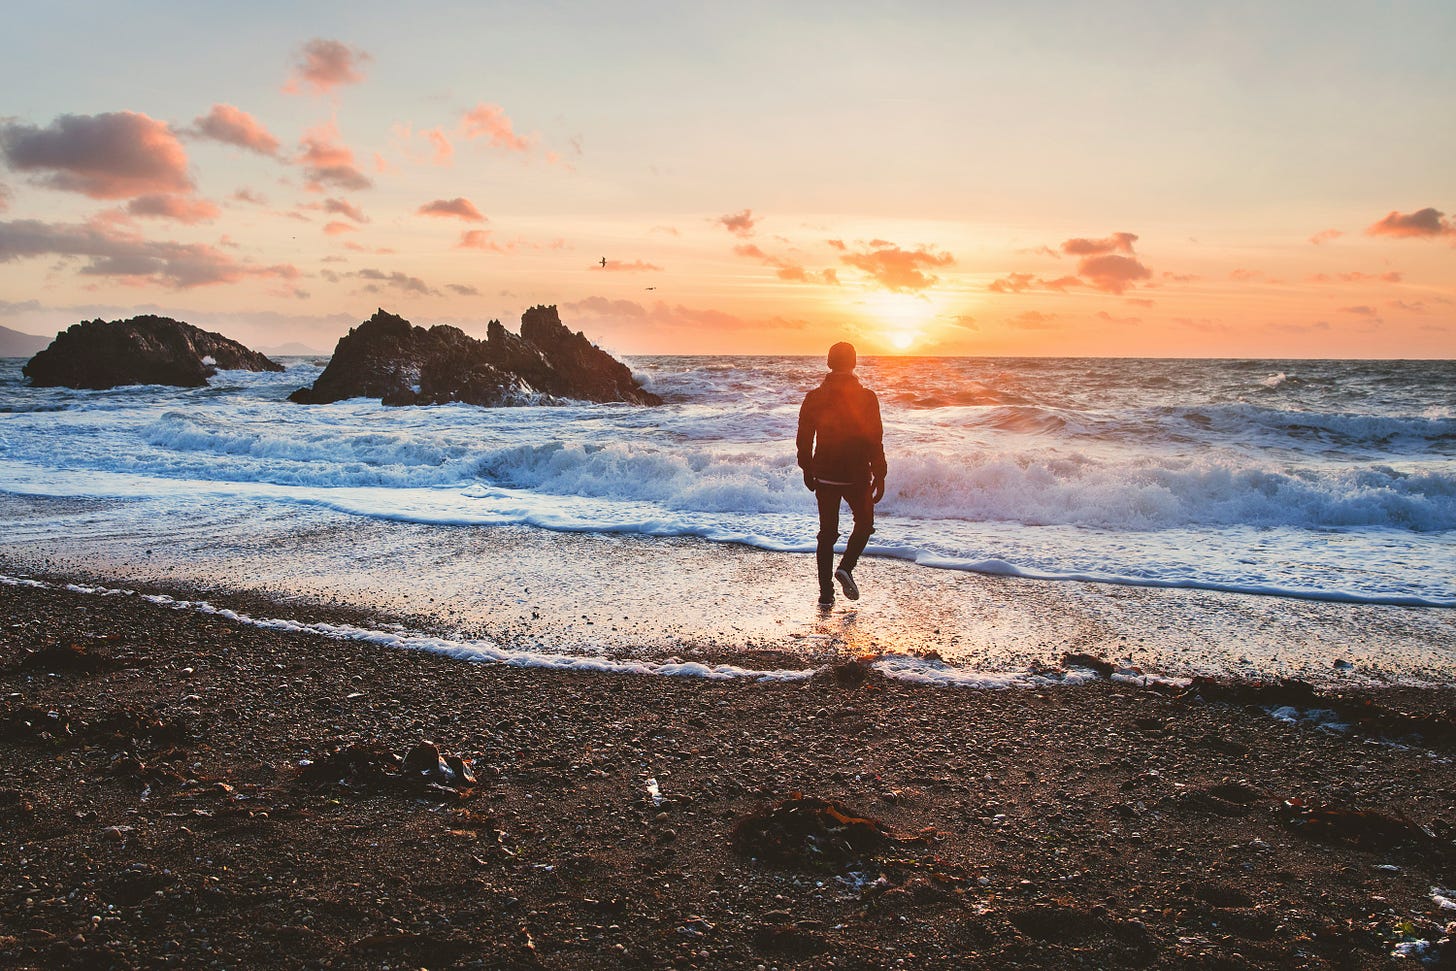 Image of a man walking on a beach at sunrise.